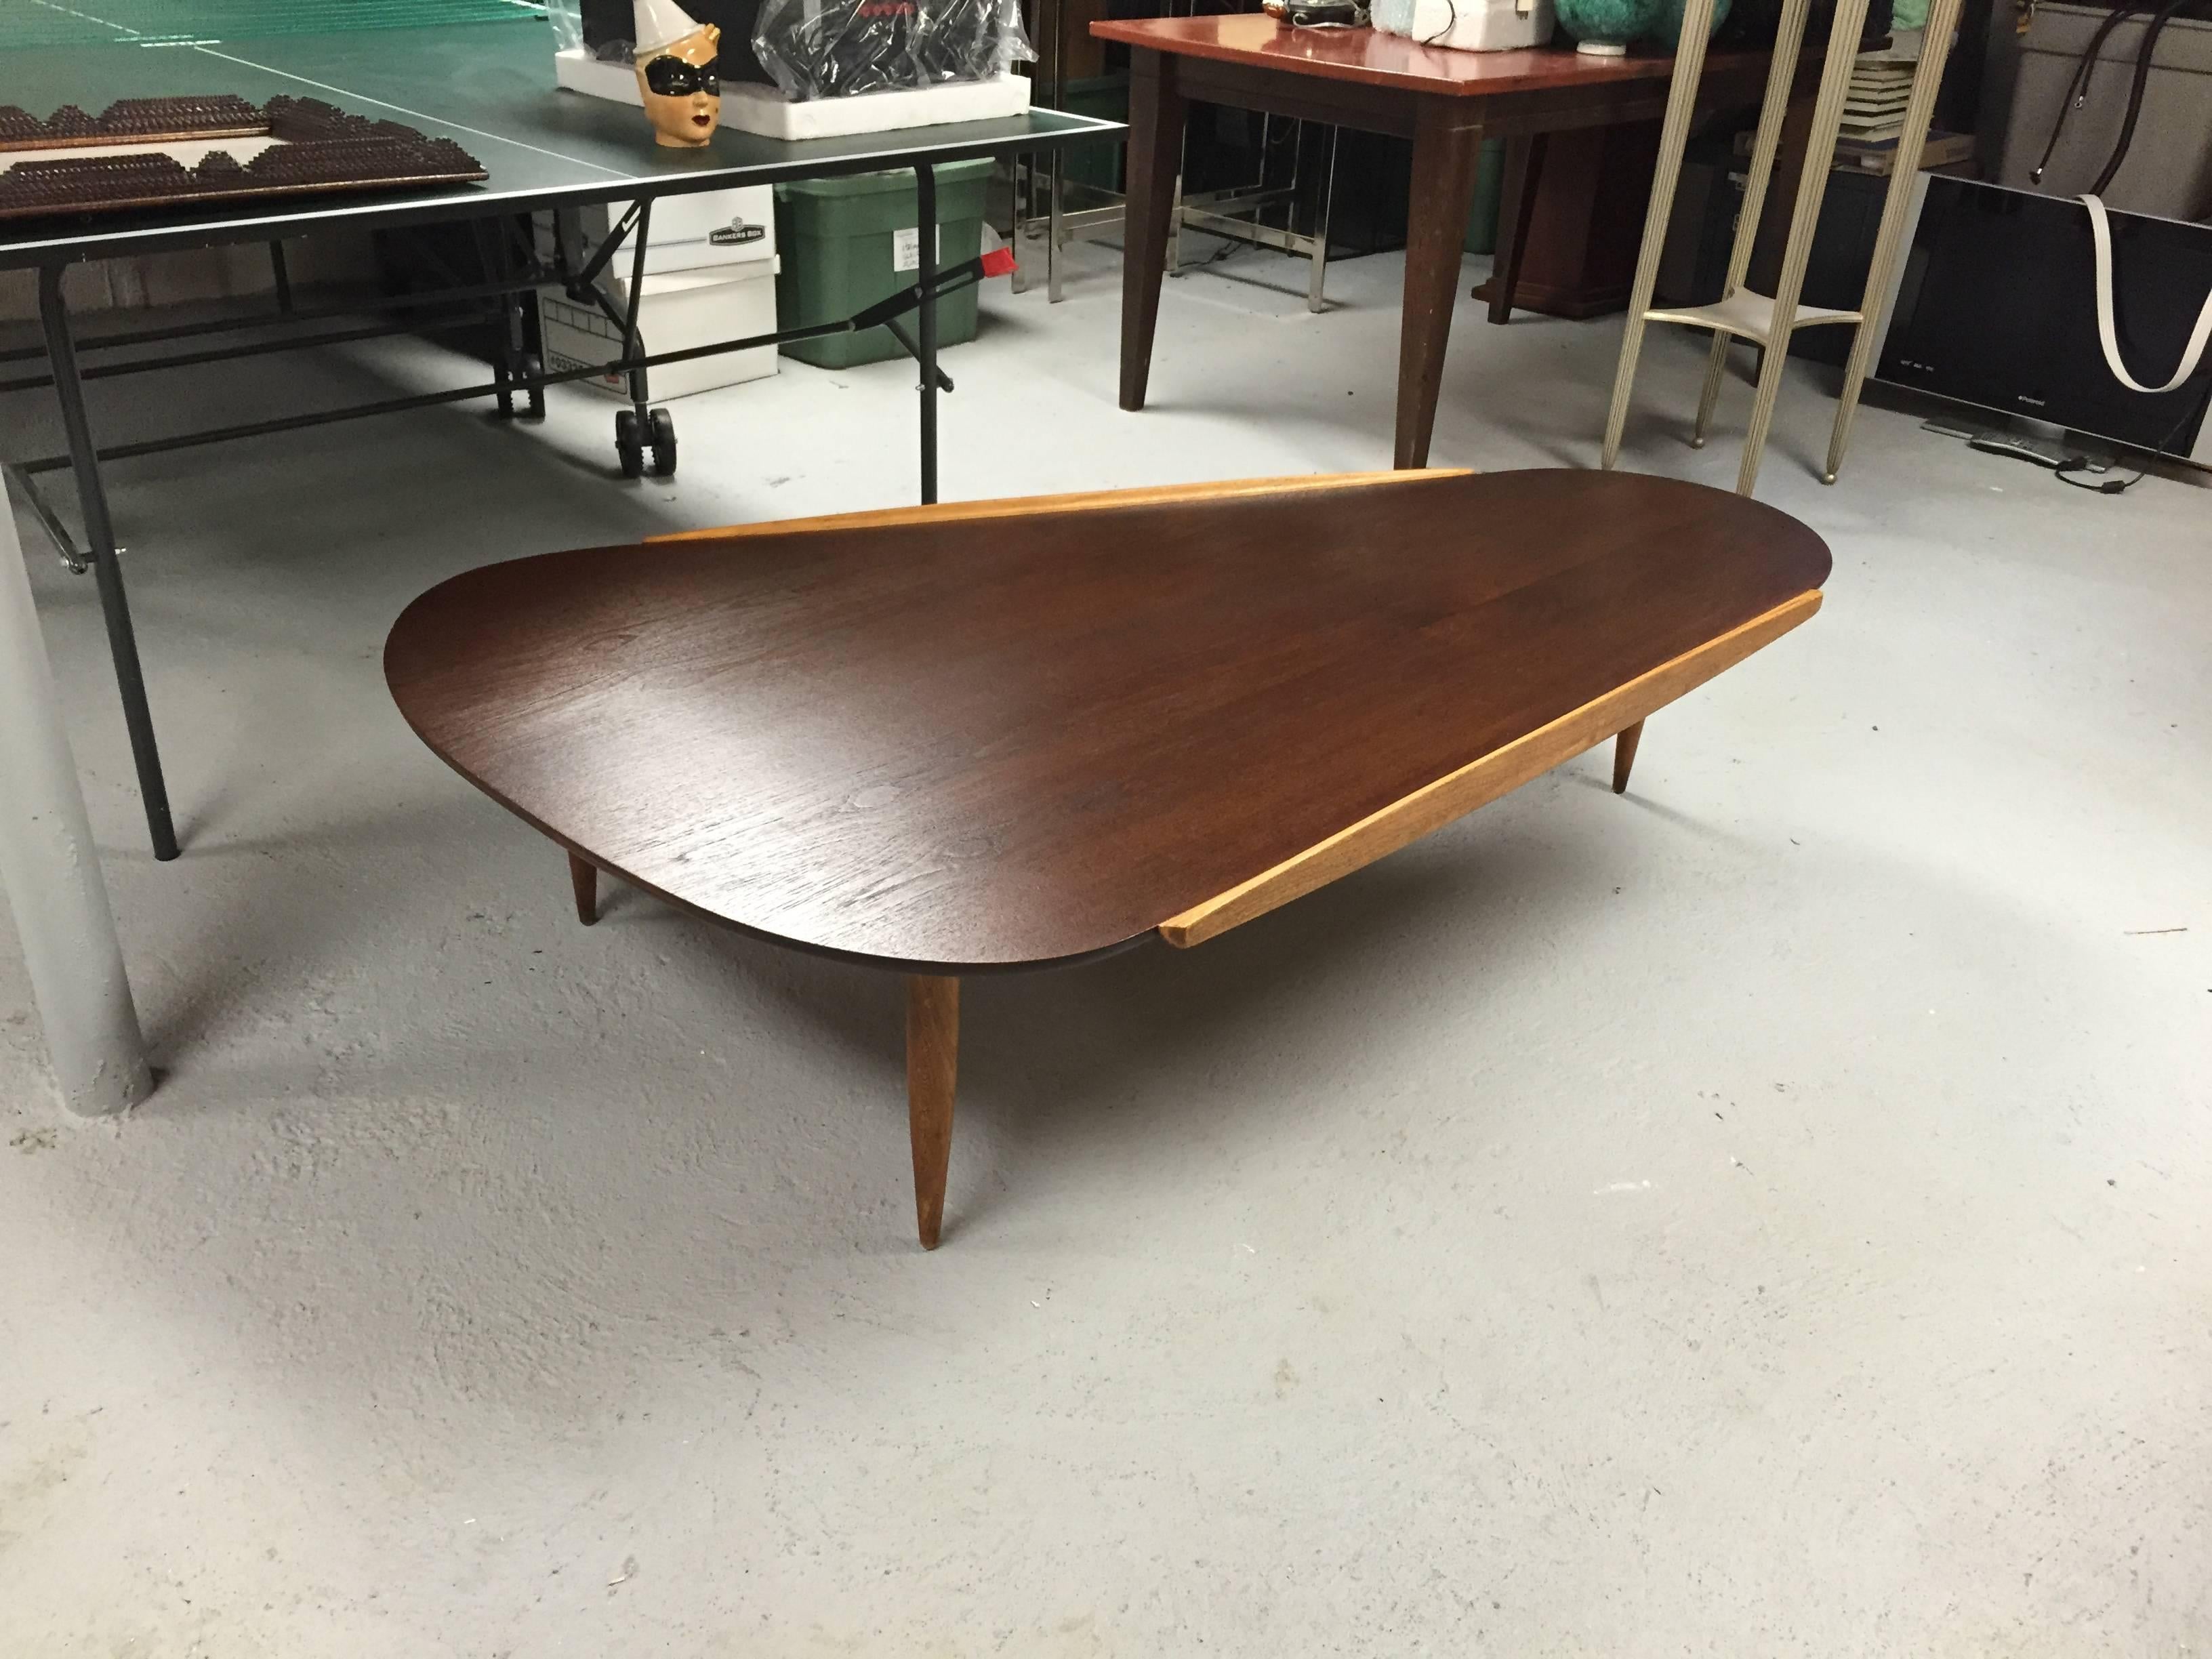 Sculpturally designed in walnut and oak is this 1960s coffee table made by Lane Manufacturing Comapny.
Recently refinished and in very good condition.